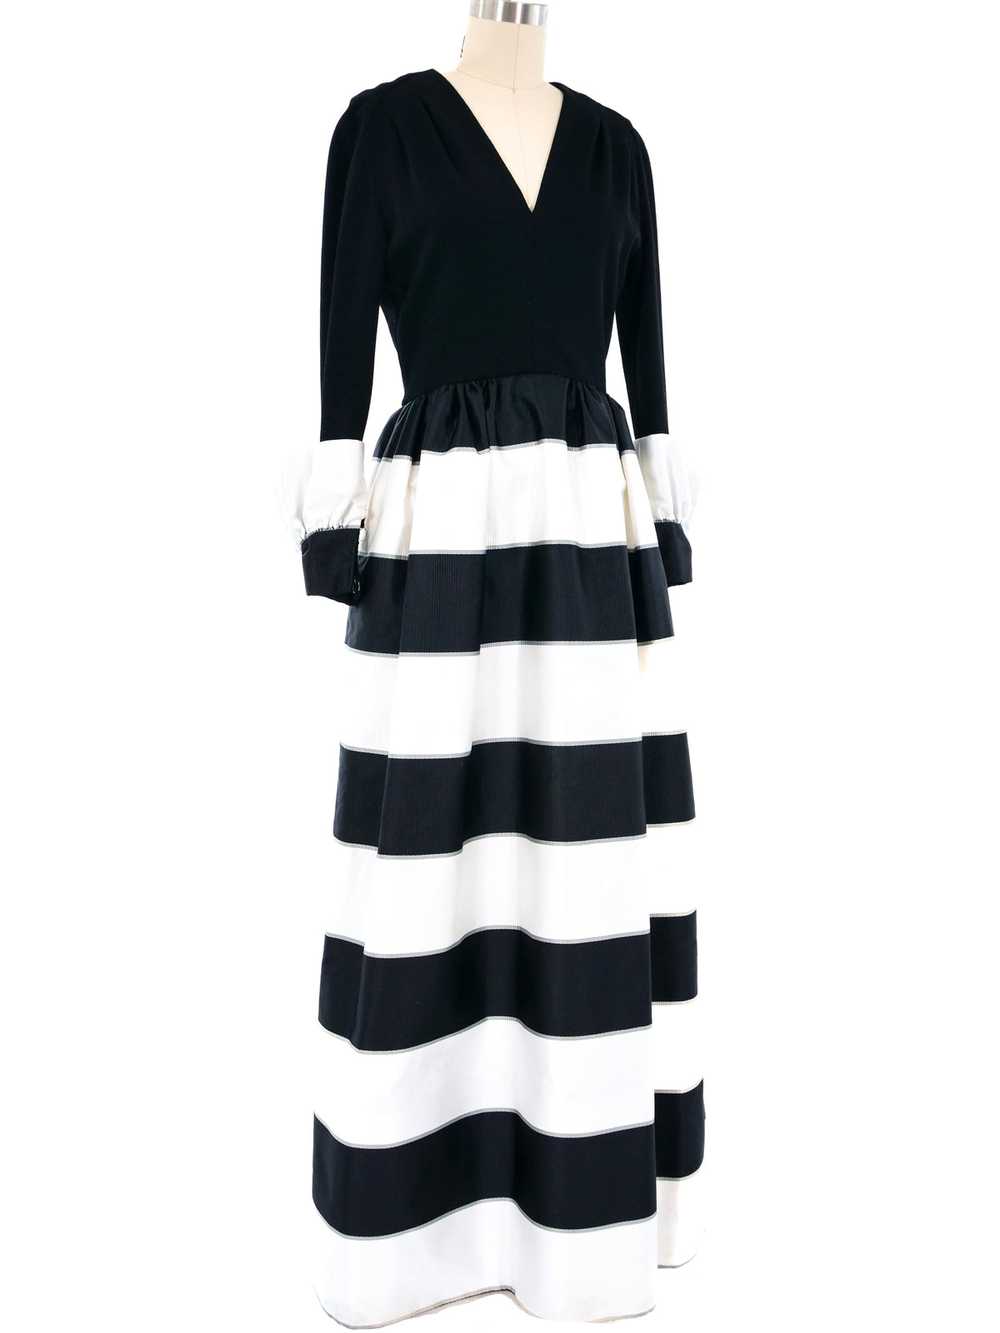 Pauline Trigere Black and White Striped Gown - image 3